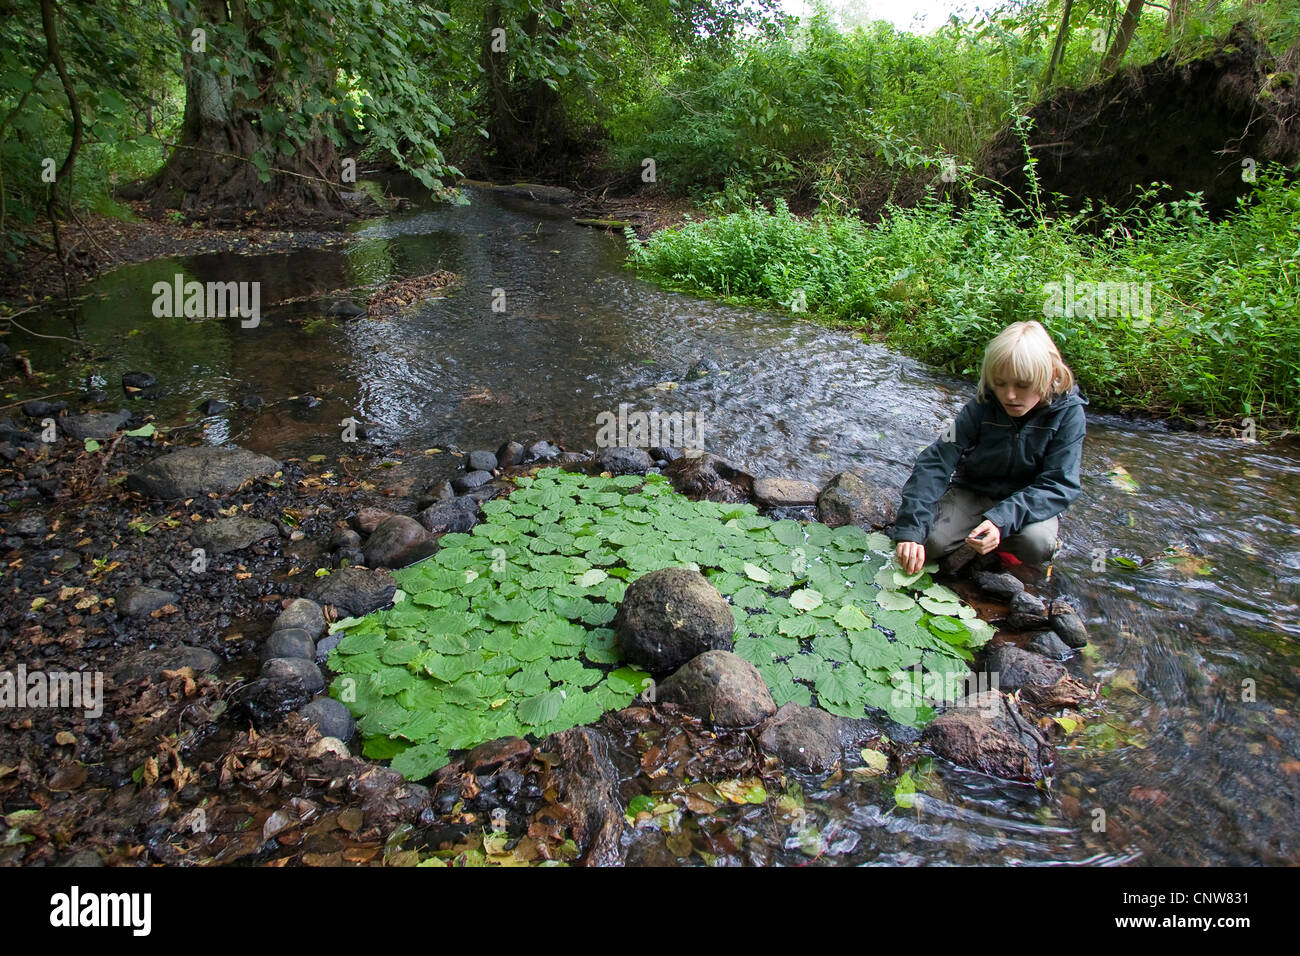 child have formed a heart with stones in a creek and filled it with green leaves, Germany Stock Photo